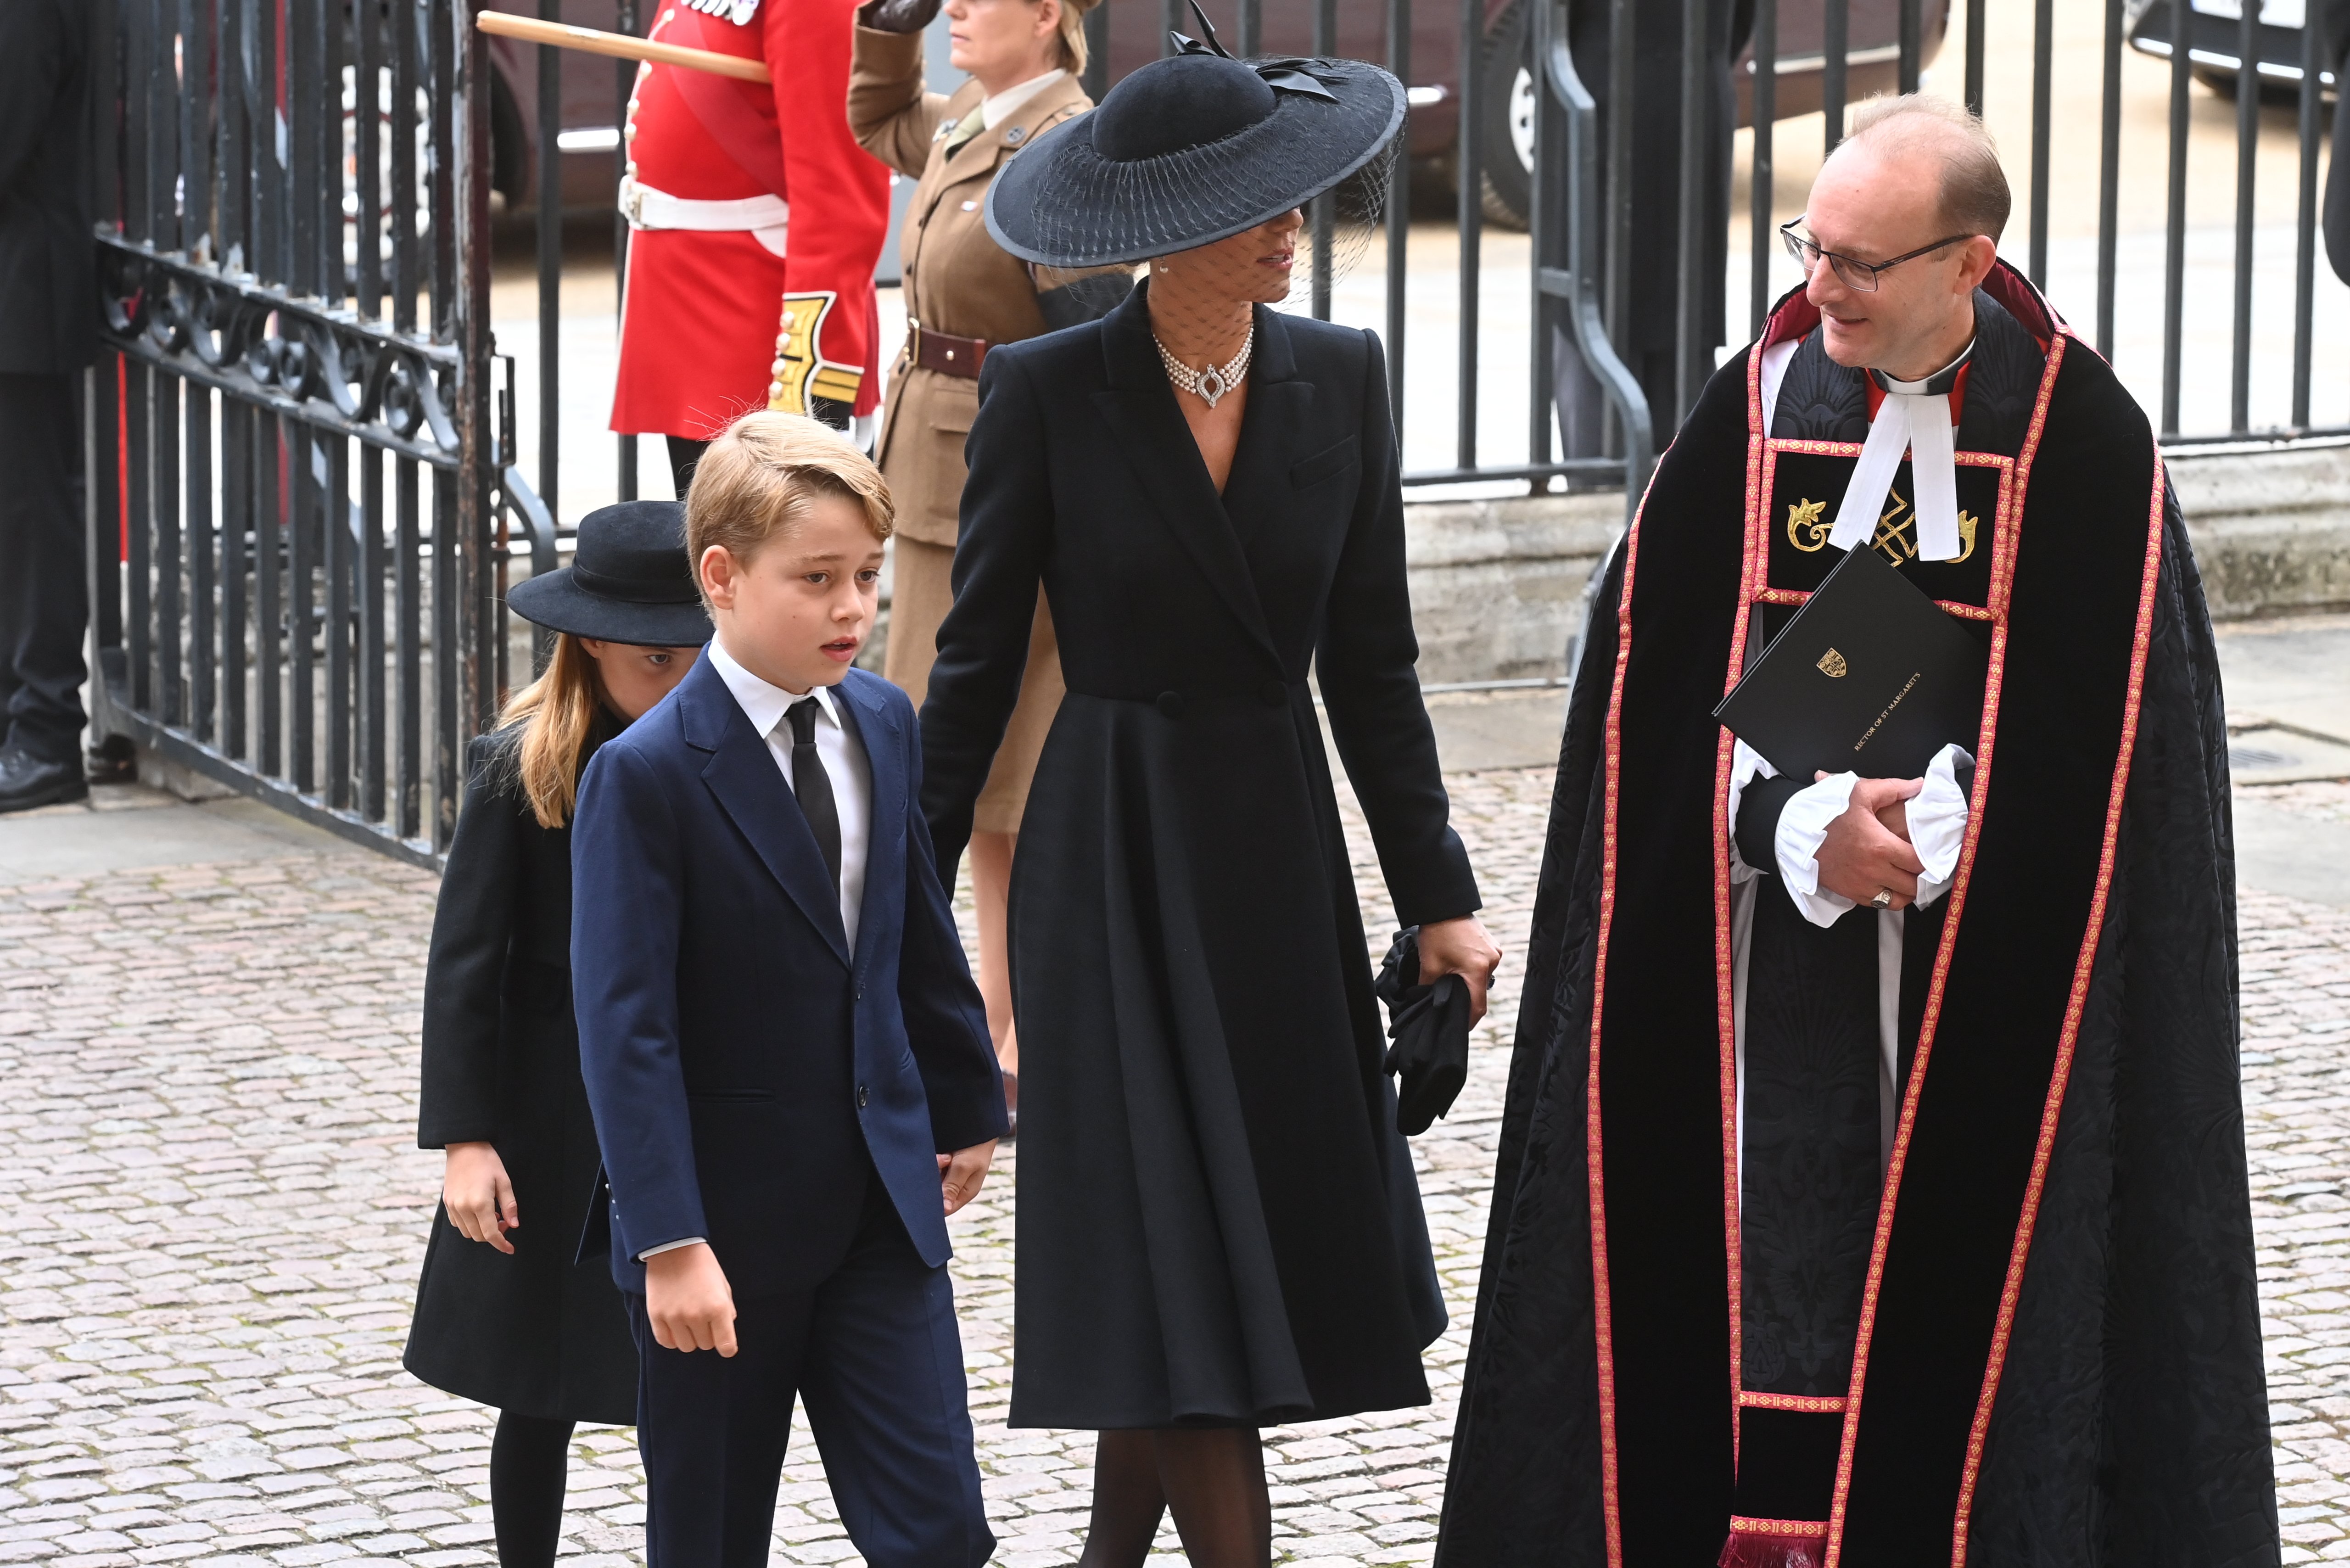 Princess Charlotte Prince George and Catherine, walk behind The Queen's funeral cortege as it proceeds towards Westminster Abbey on September 19, 2022, in London, England. | Source: Getty Images